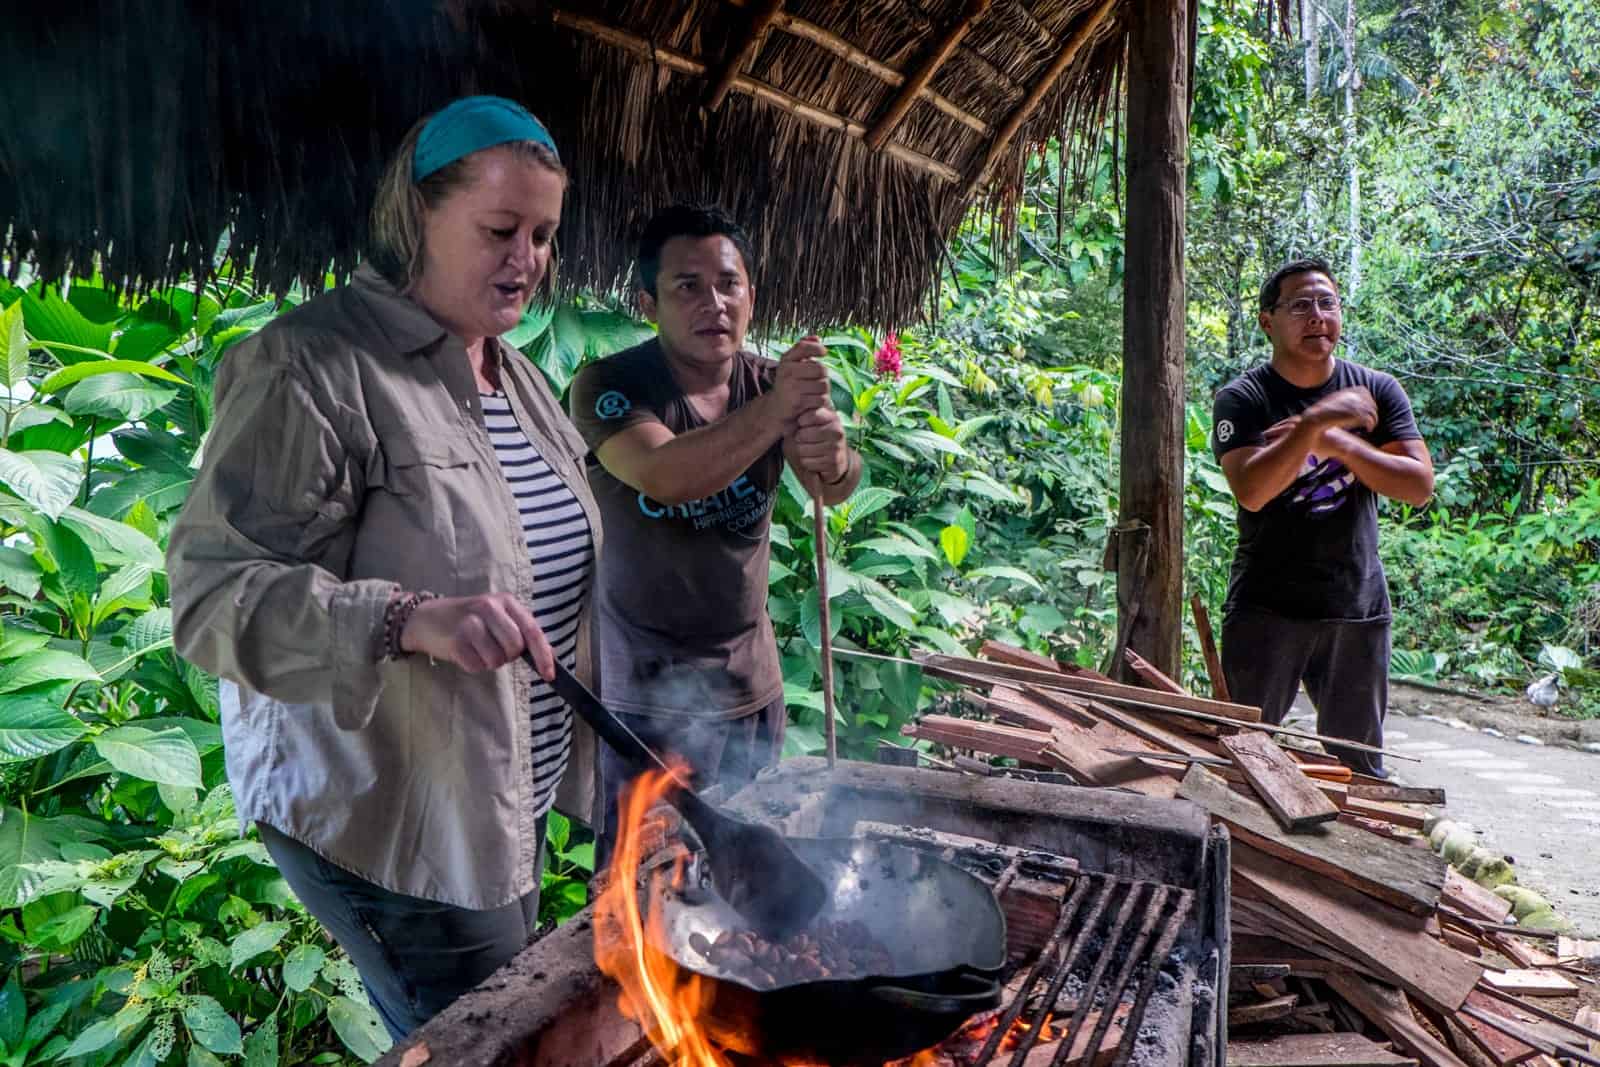 A woman stirs an iron pan full of cacao beans on an open fire grill. She stands under a thatched roof with two men, surrounded by the green of the Ecuador Amazon jungle.